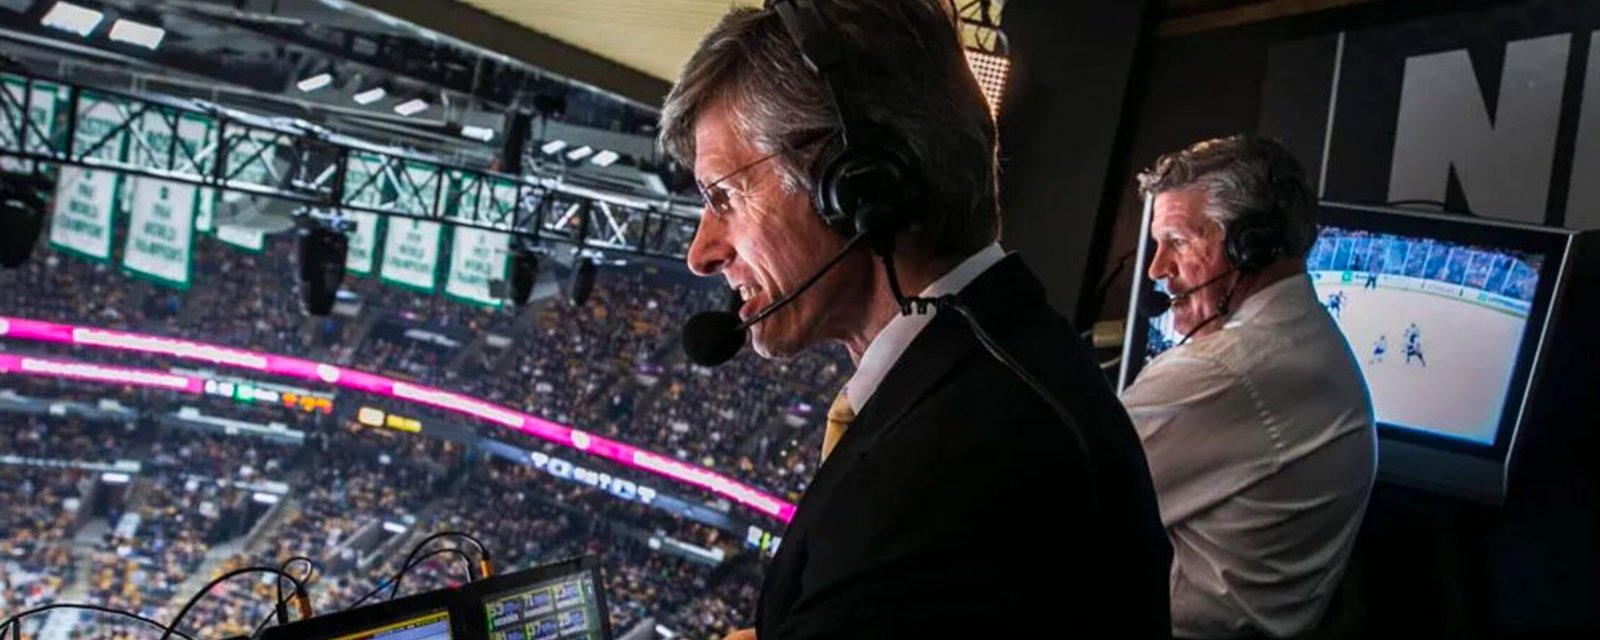 Things go from bad to worse for longtime Bruins broadcaster Jack Edwards